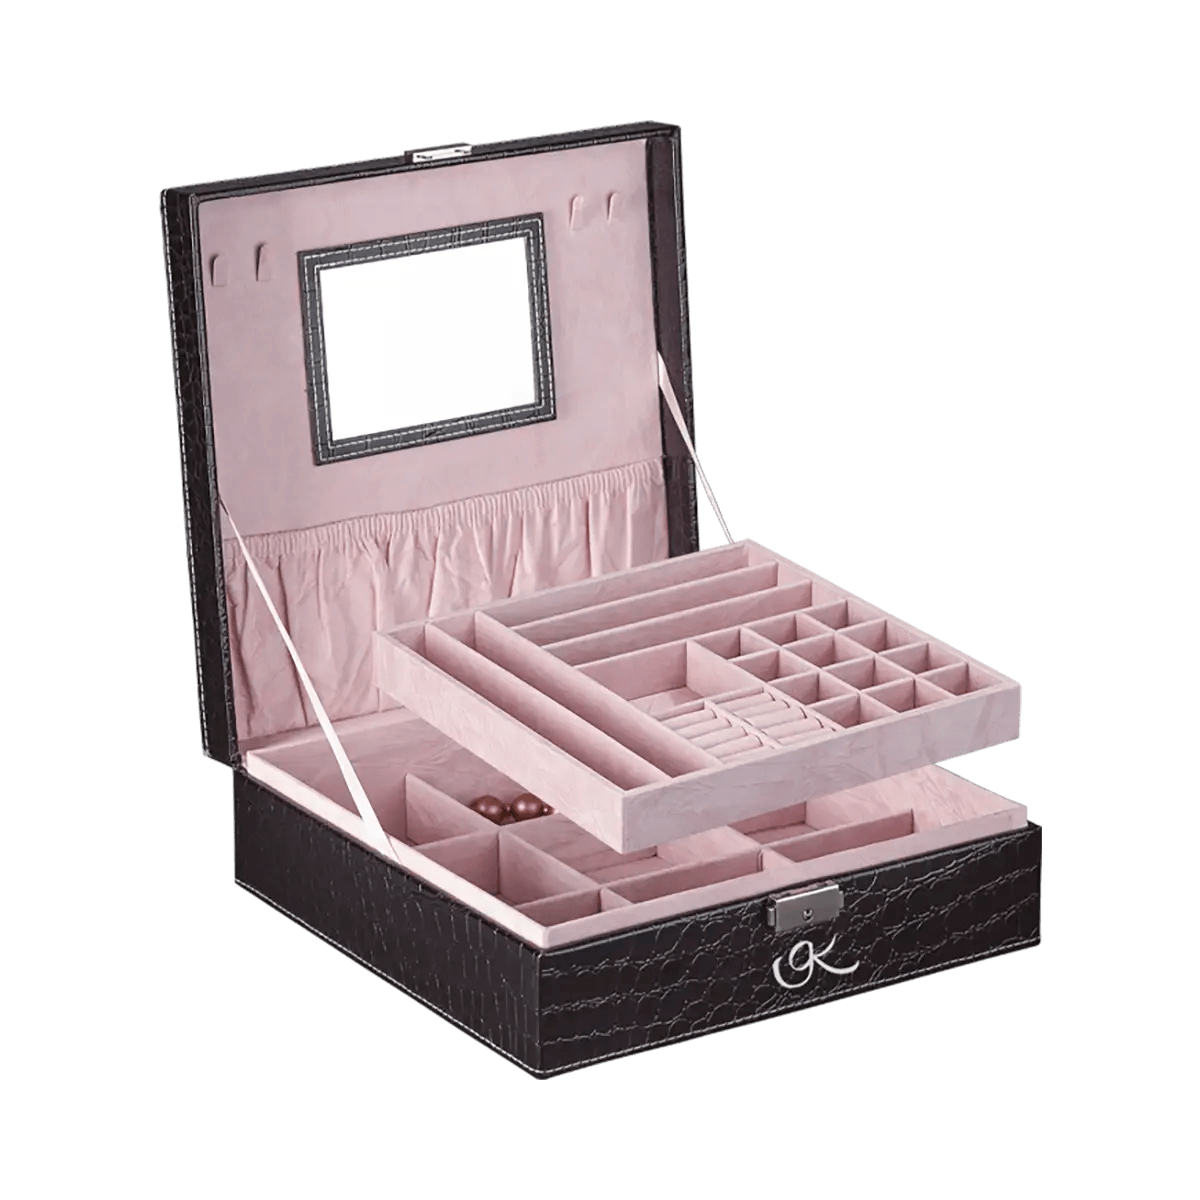 Large Leather Print Laptop Case With StrapLarge black vinyl snakeskin print with pink interior jewelry box for women. Shop in San Diego, CA.